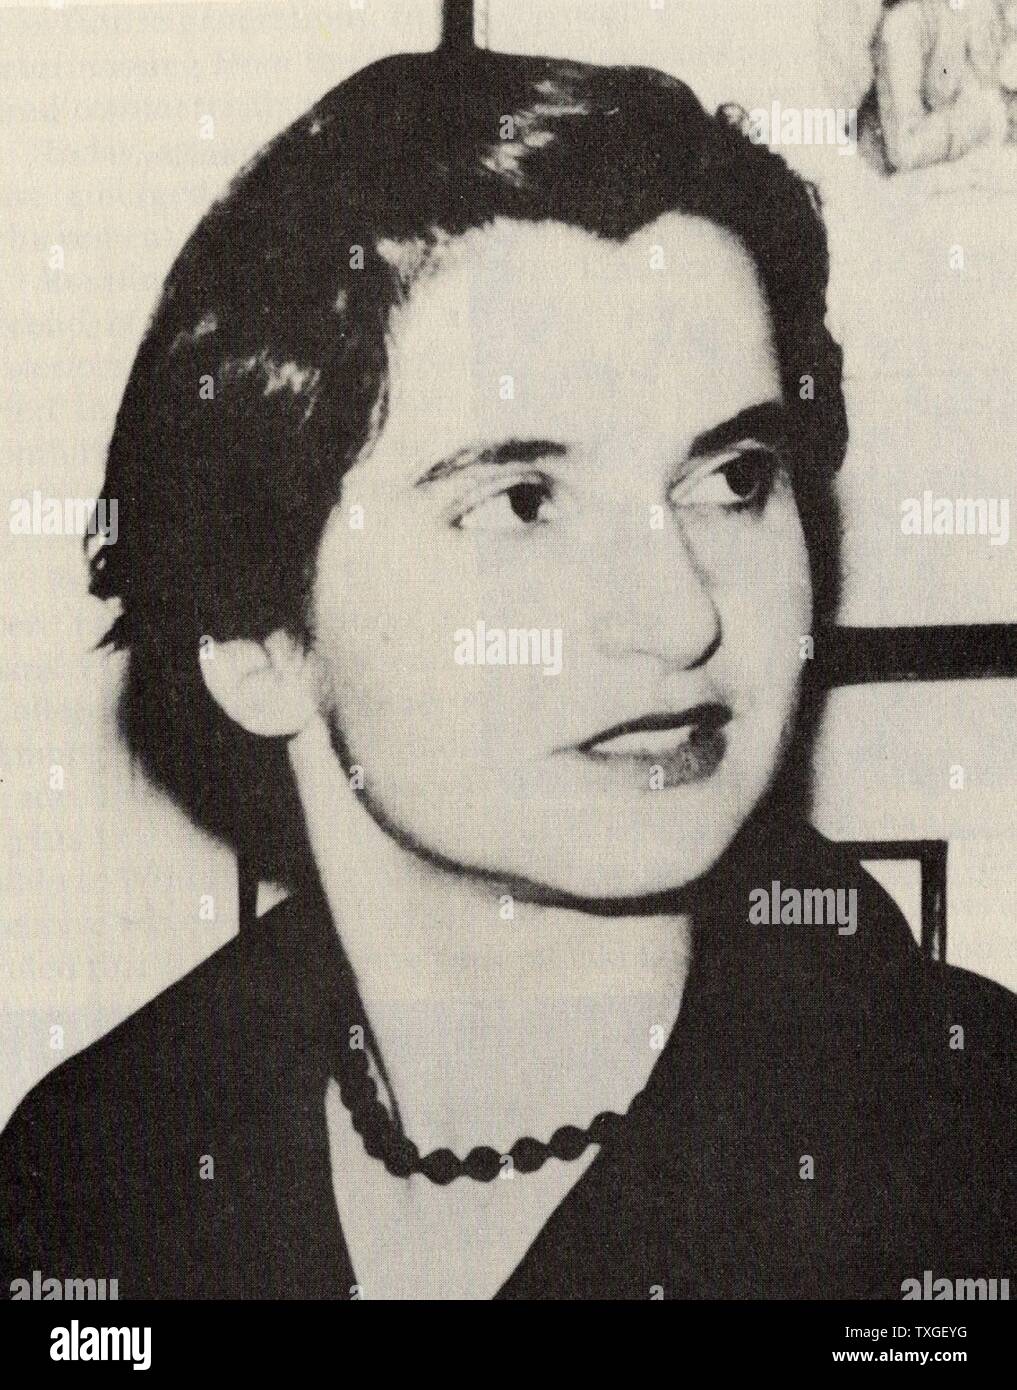 Rosalind Elsie Franklin (1920 – 16 April 1958). English chemist and X-ray crystallographer who made contributions to the understanding of the fine molecular structures of DNA (deoxyribonucleic acid), RNA (ribonucleic acid) Stock Photo